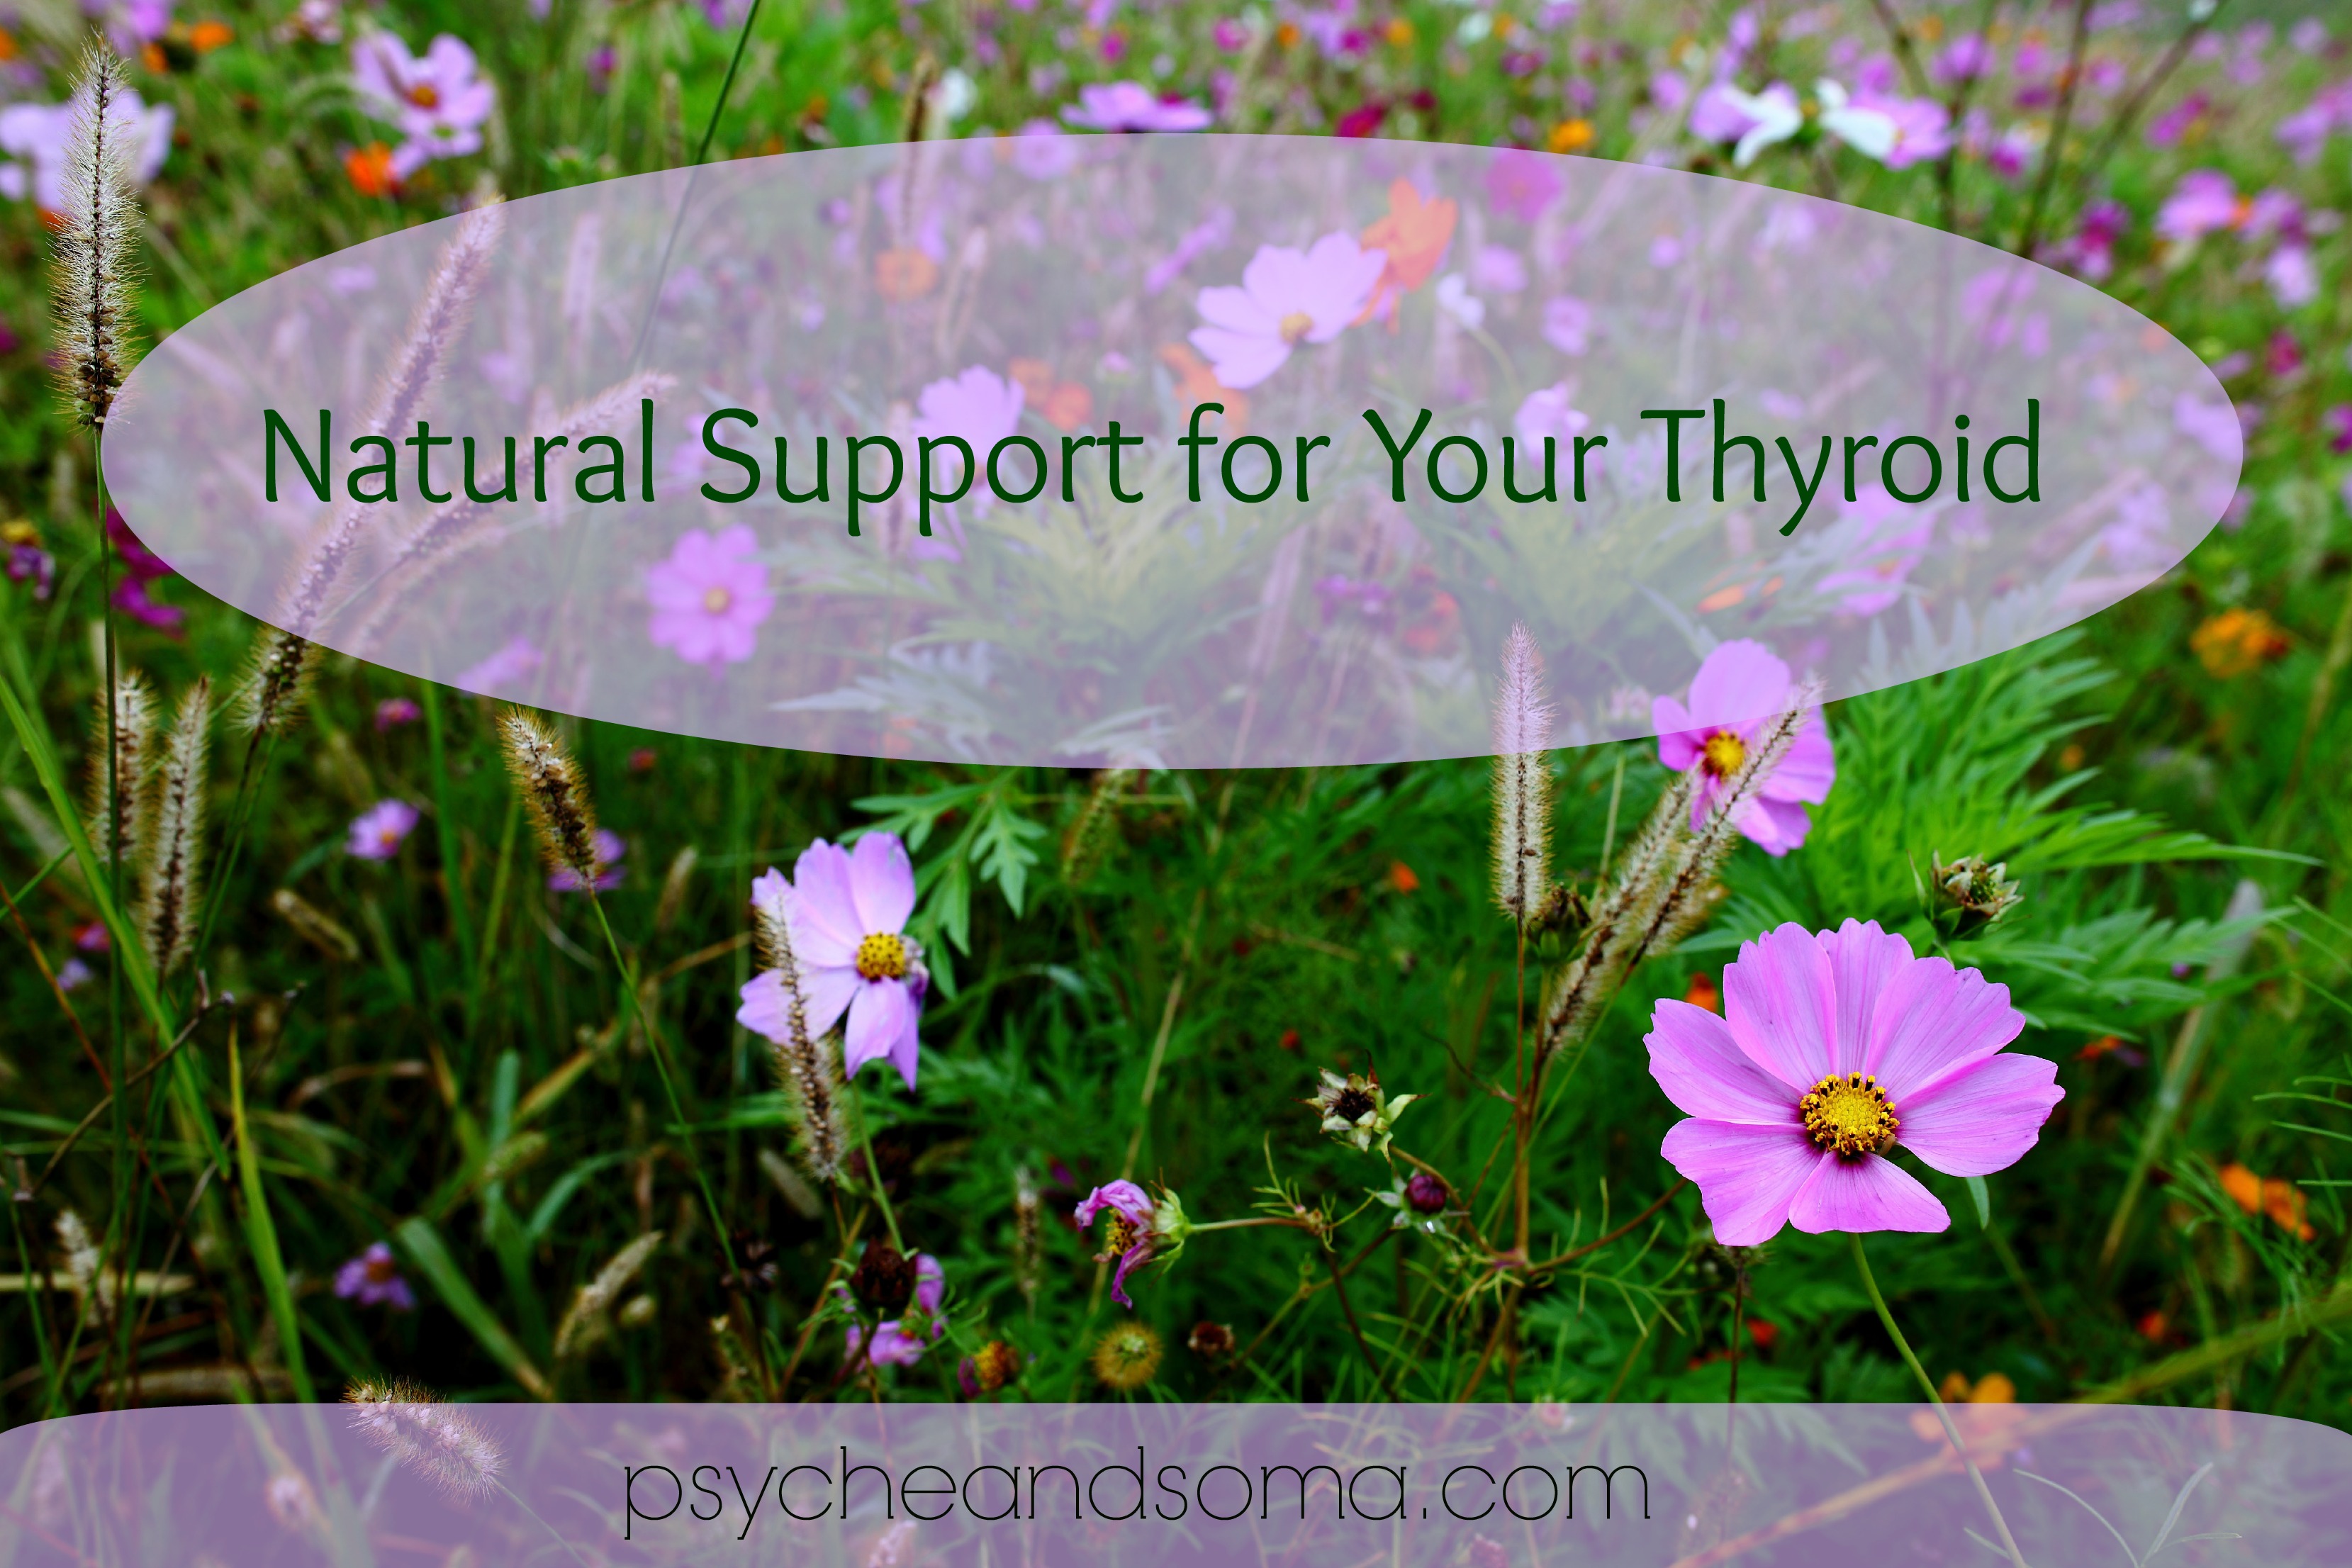 Thyroid: Symptoms & Support